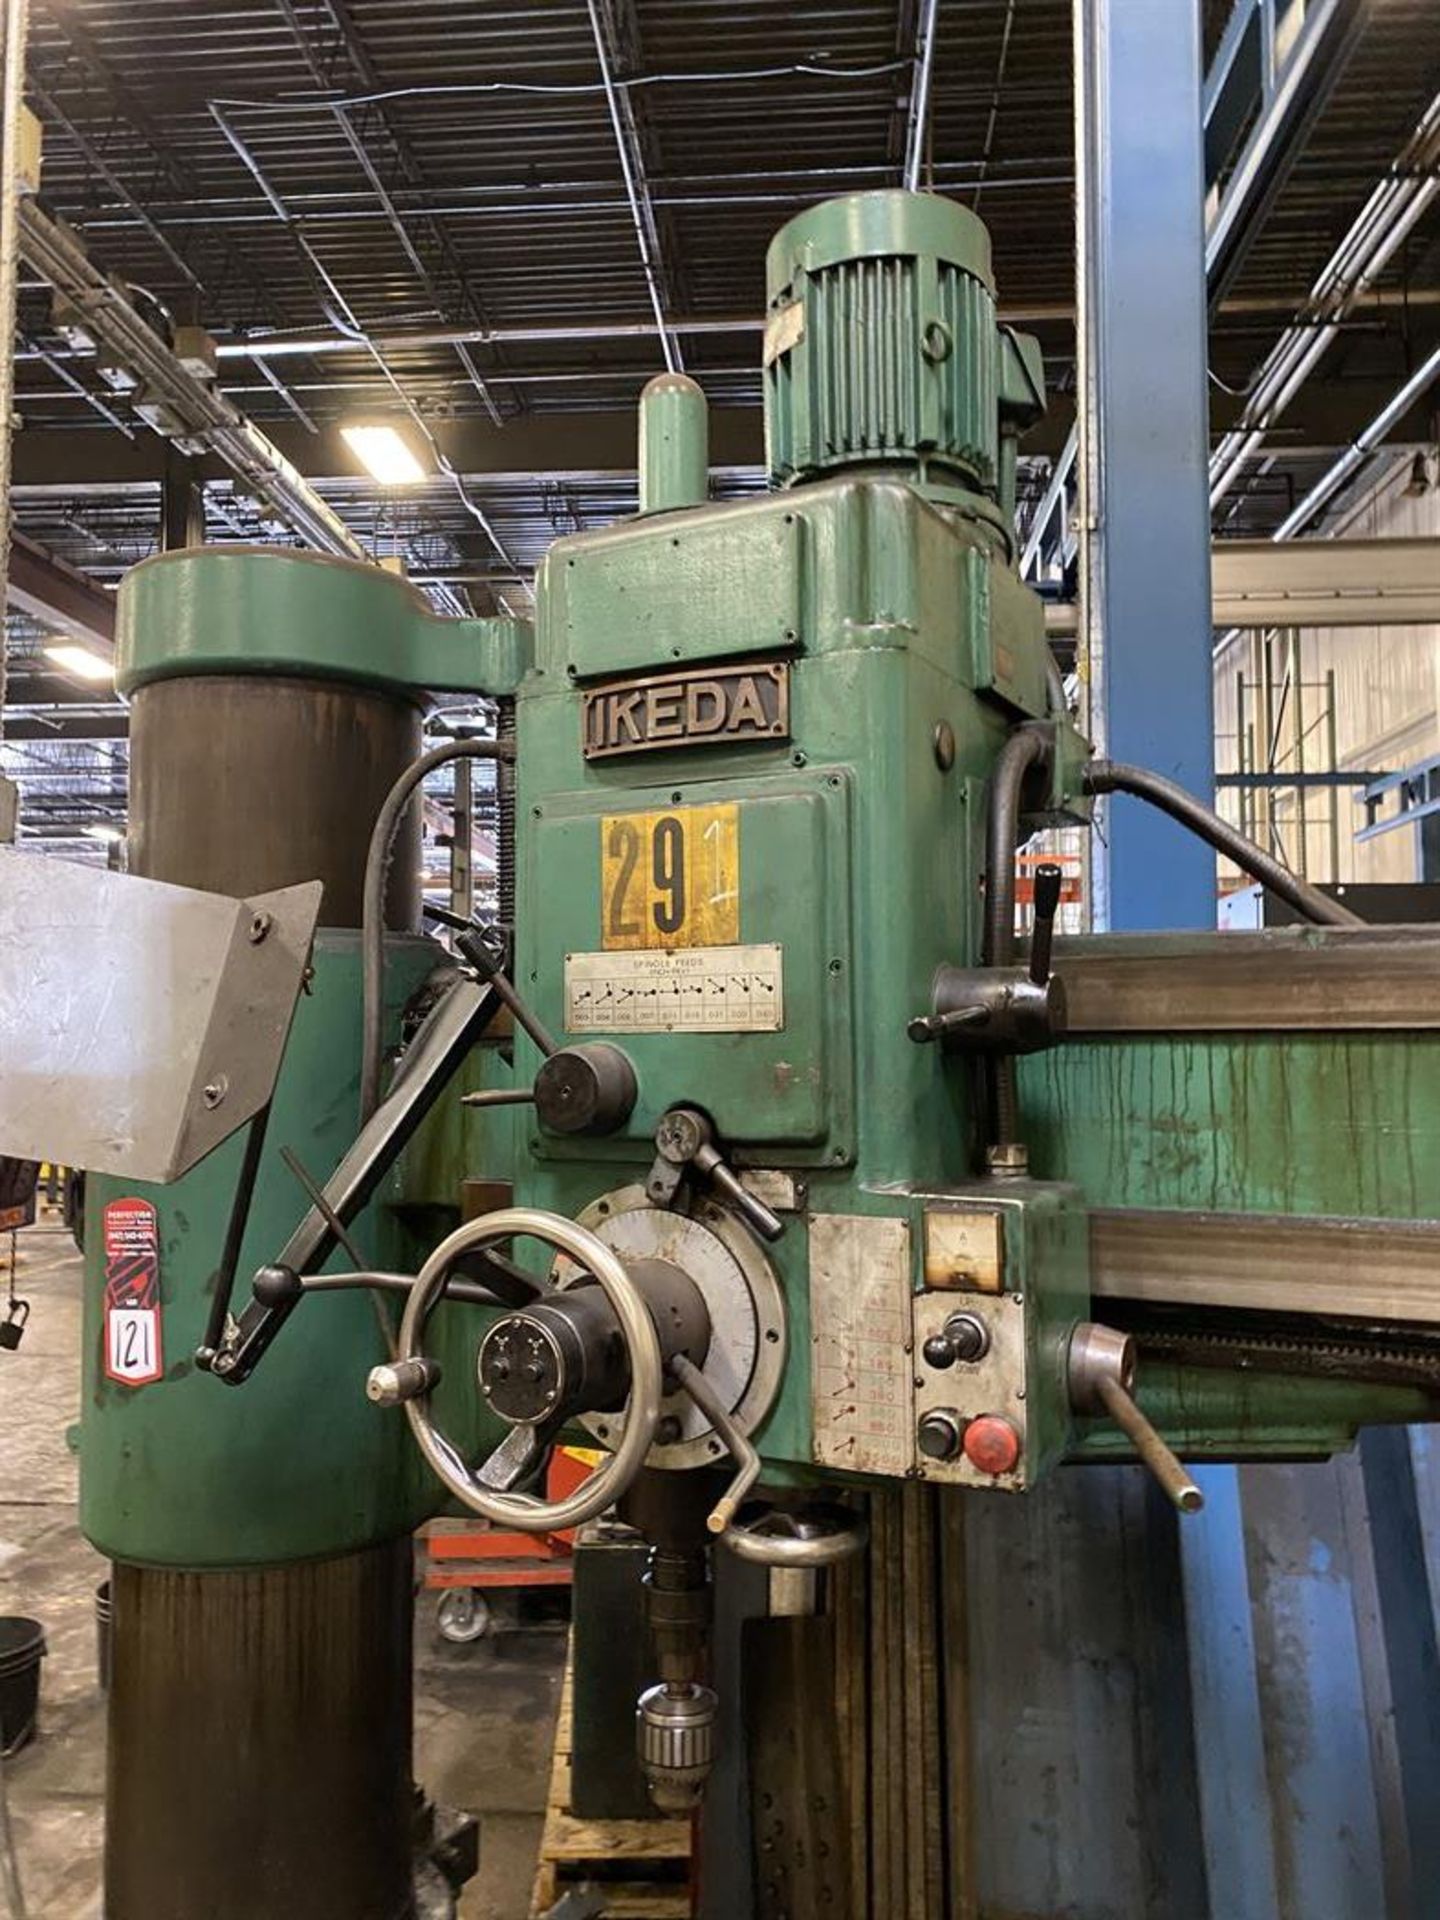 IKEDA RM-1575 Radial Arm Drill, s/n 81480, 5’ Arm, 13” Column, 1500 RPM Max Spindle Speed, 27” x 16” - Image 4 of 6